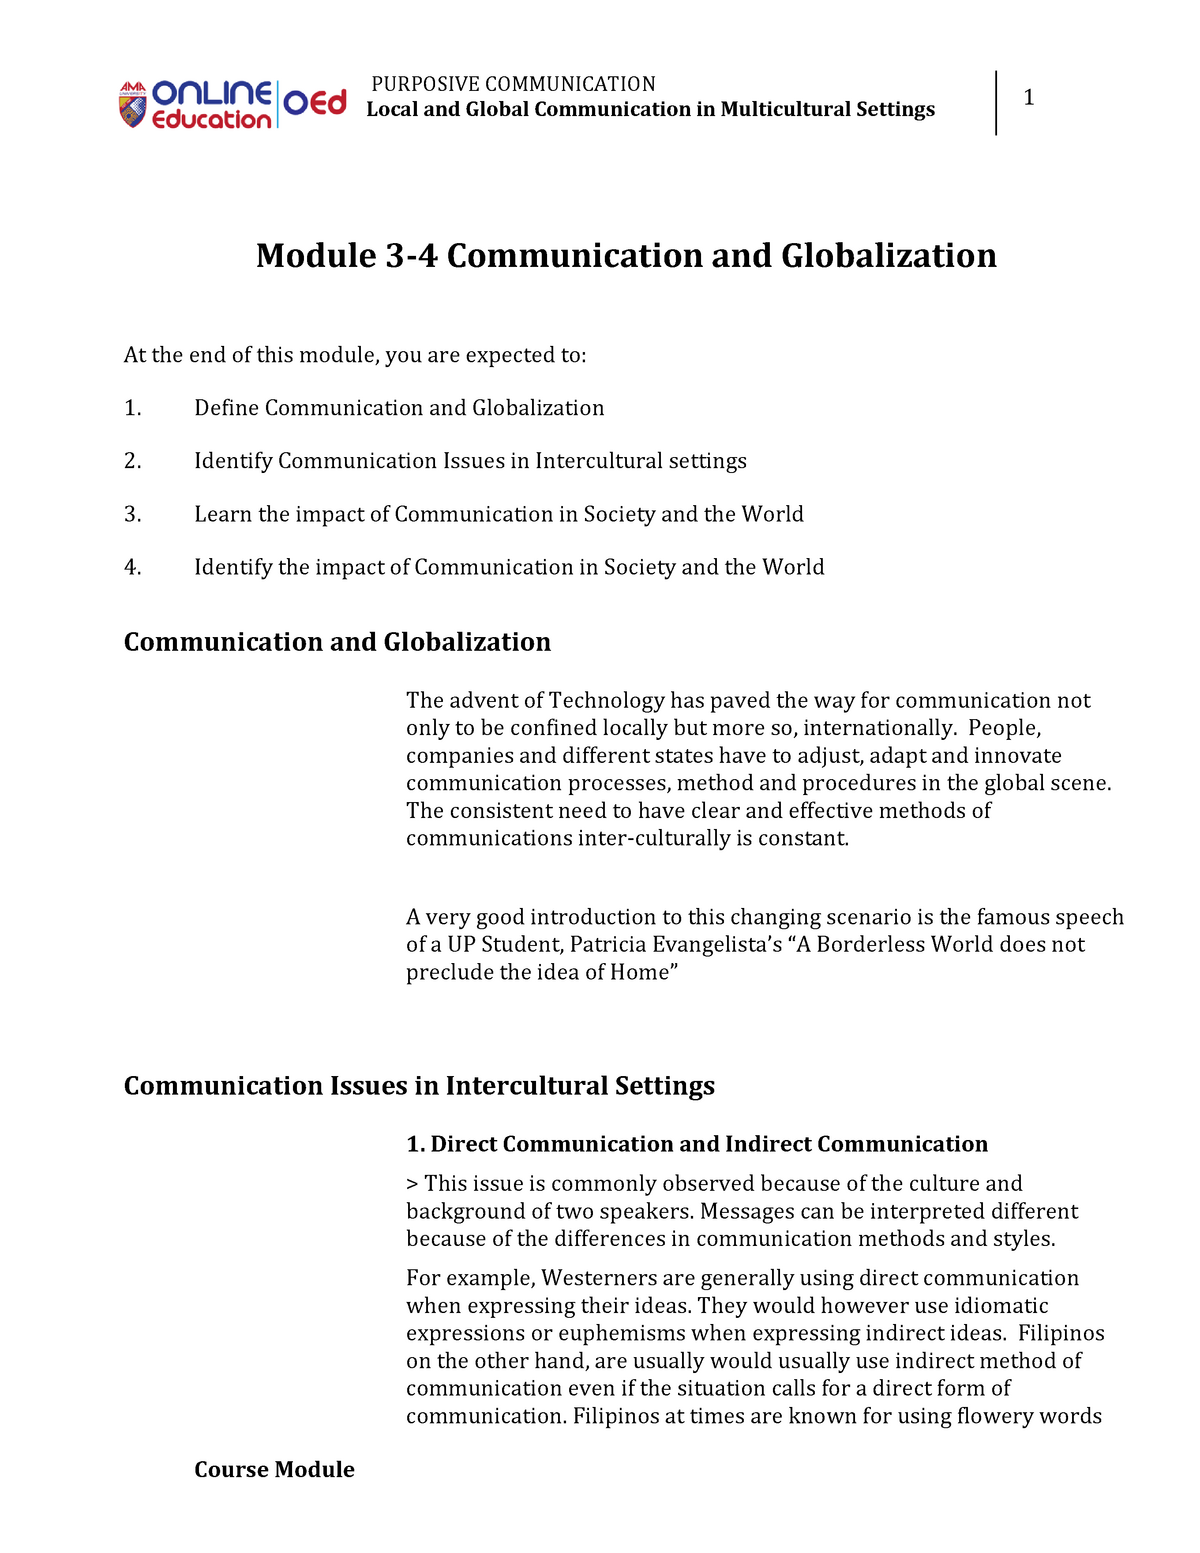 what are the connection between communication and globalization essay